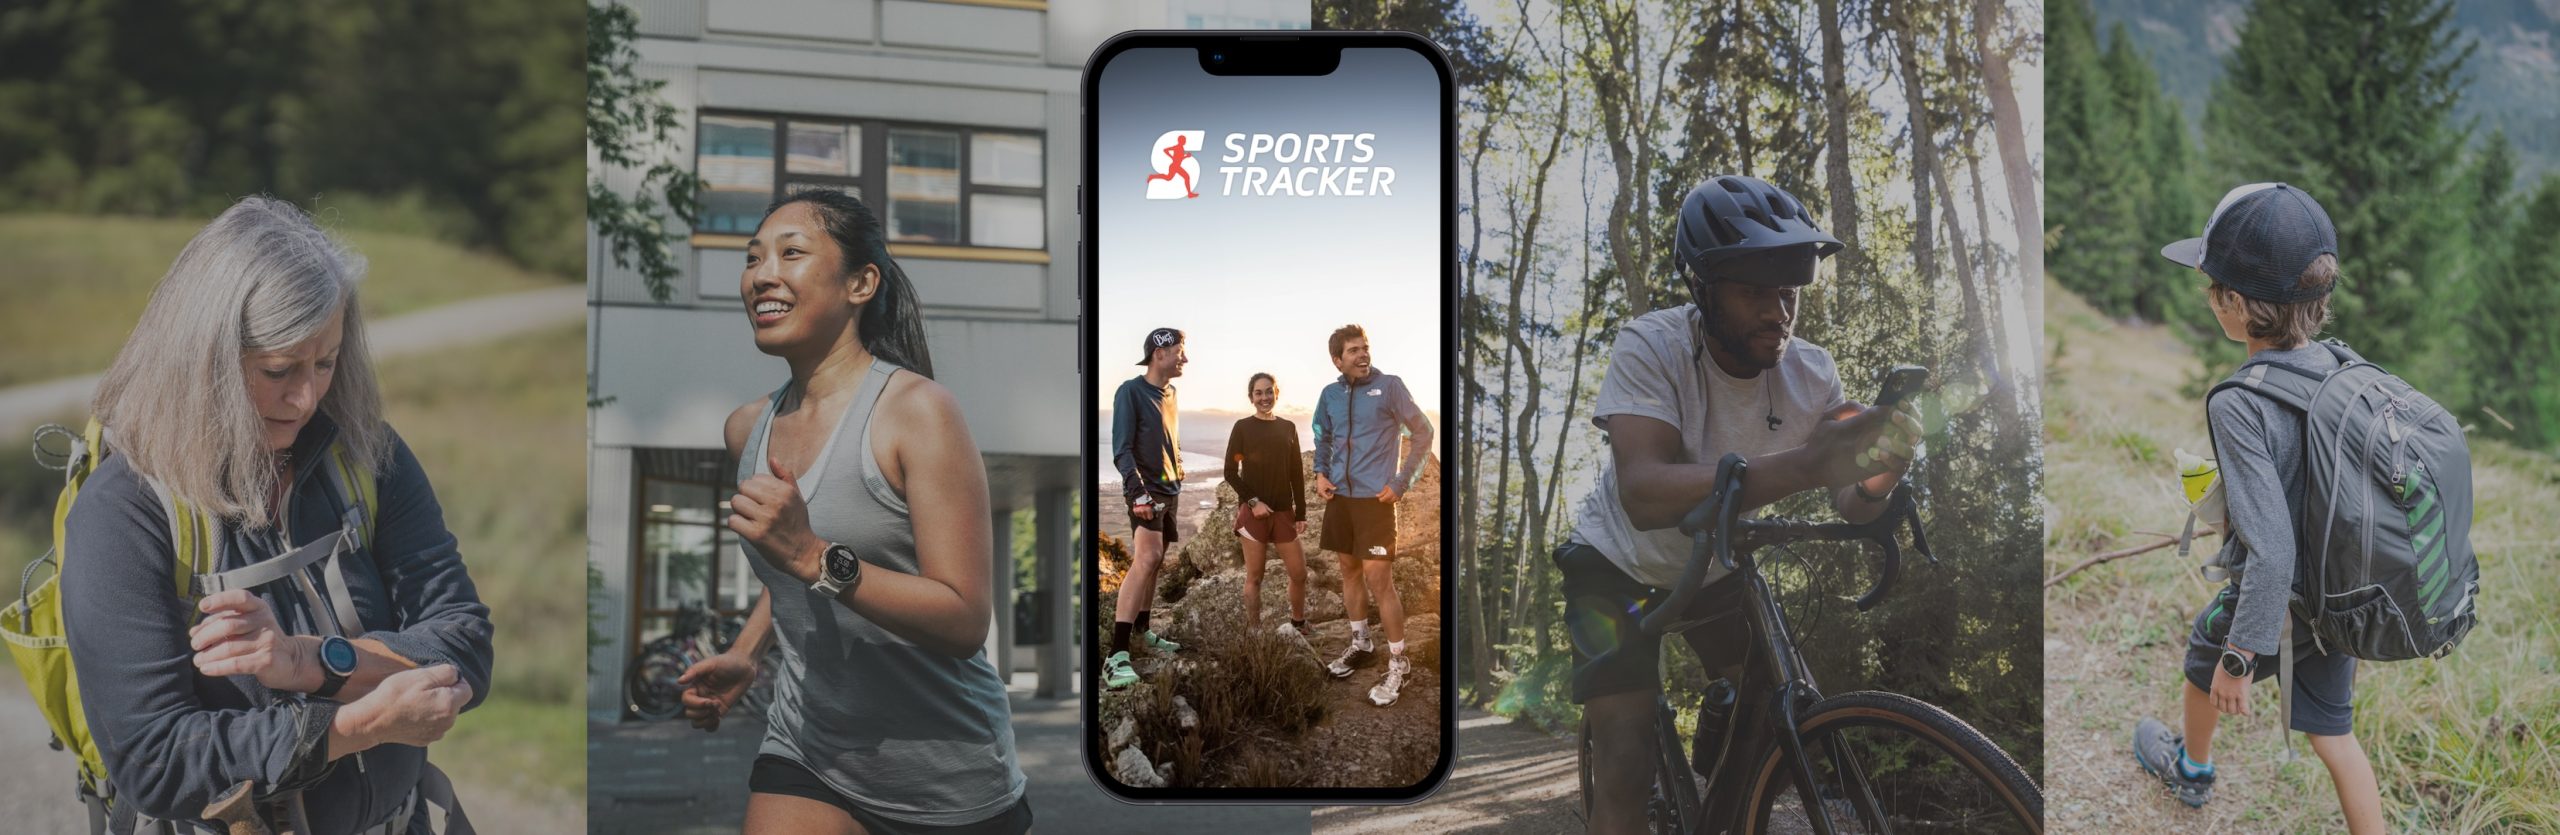 Picture of people doing sports and a mockup of Sports Tracker mobile app